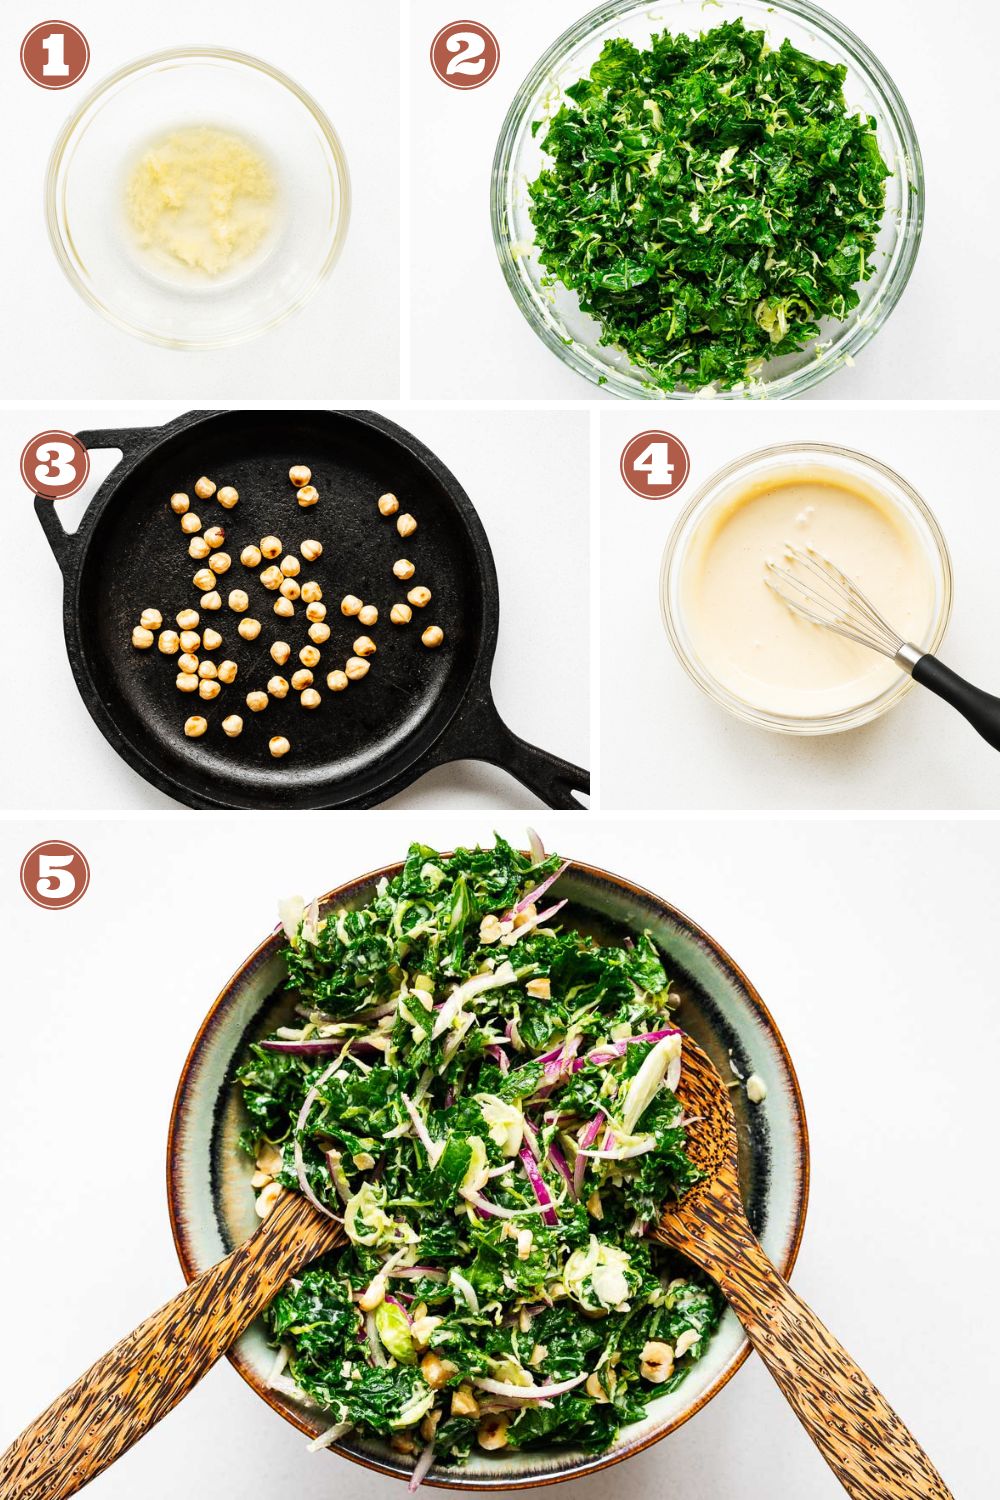 How to make vegan tahini kale salad in five easy steps: Mellow the garlic in vinegar, massage the kale, toast the hazelnuts, mix the tahini dressing, and assemble the salad.